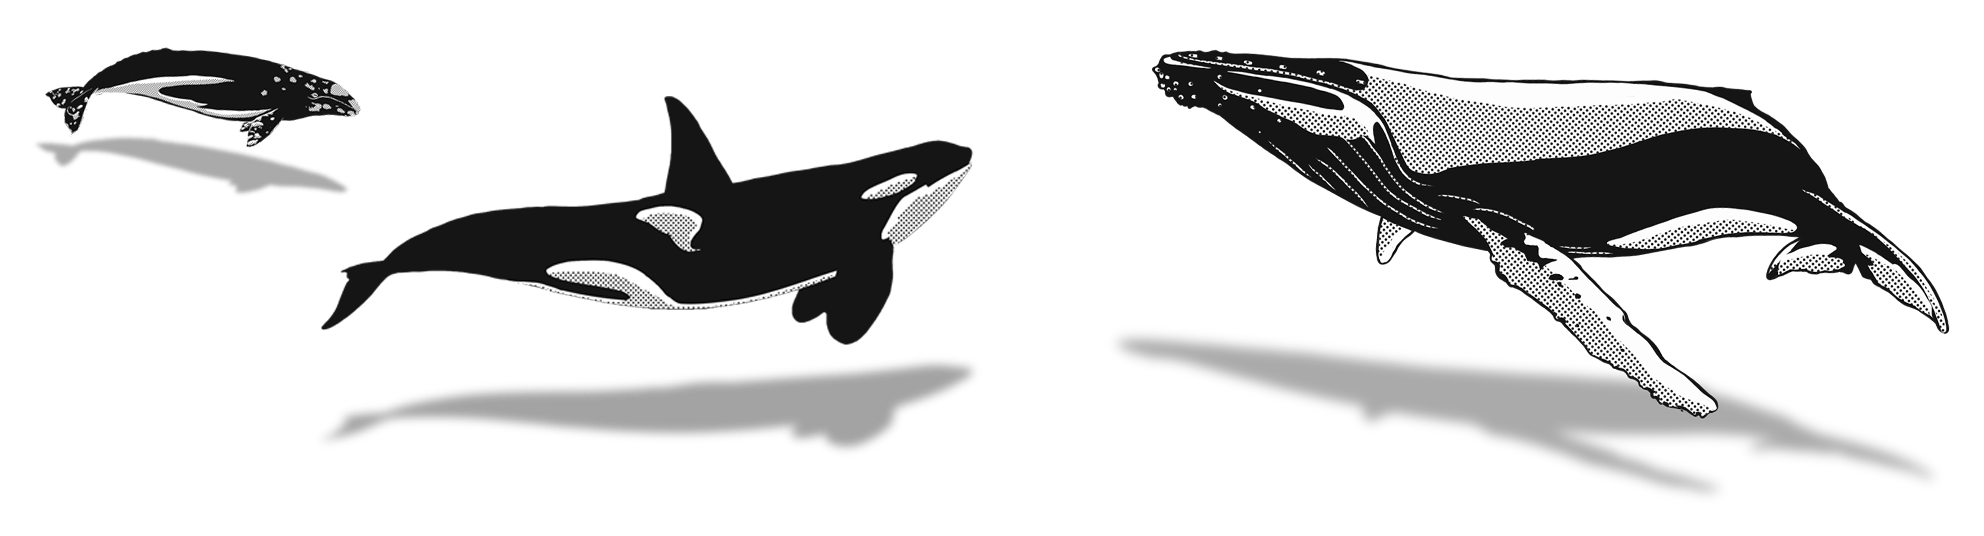 Orca clipart whale swimming, Orca whale swimming Transparent